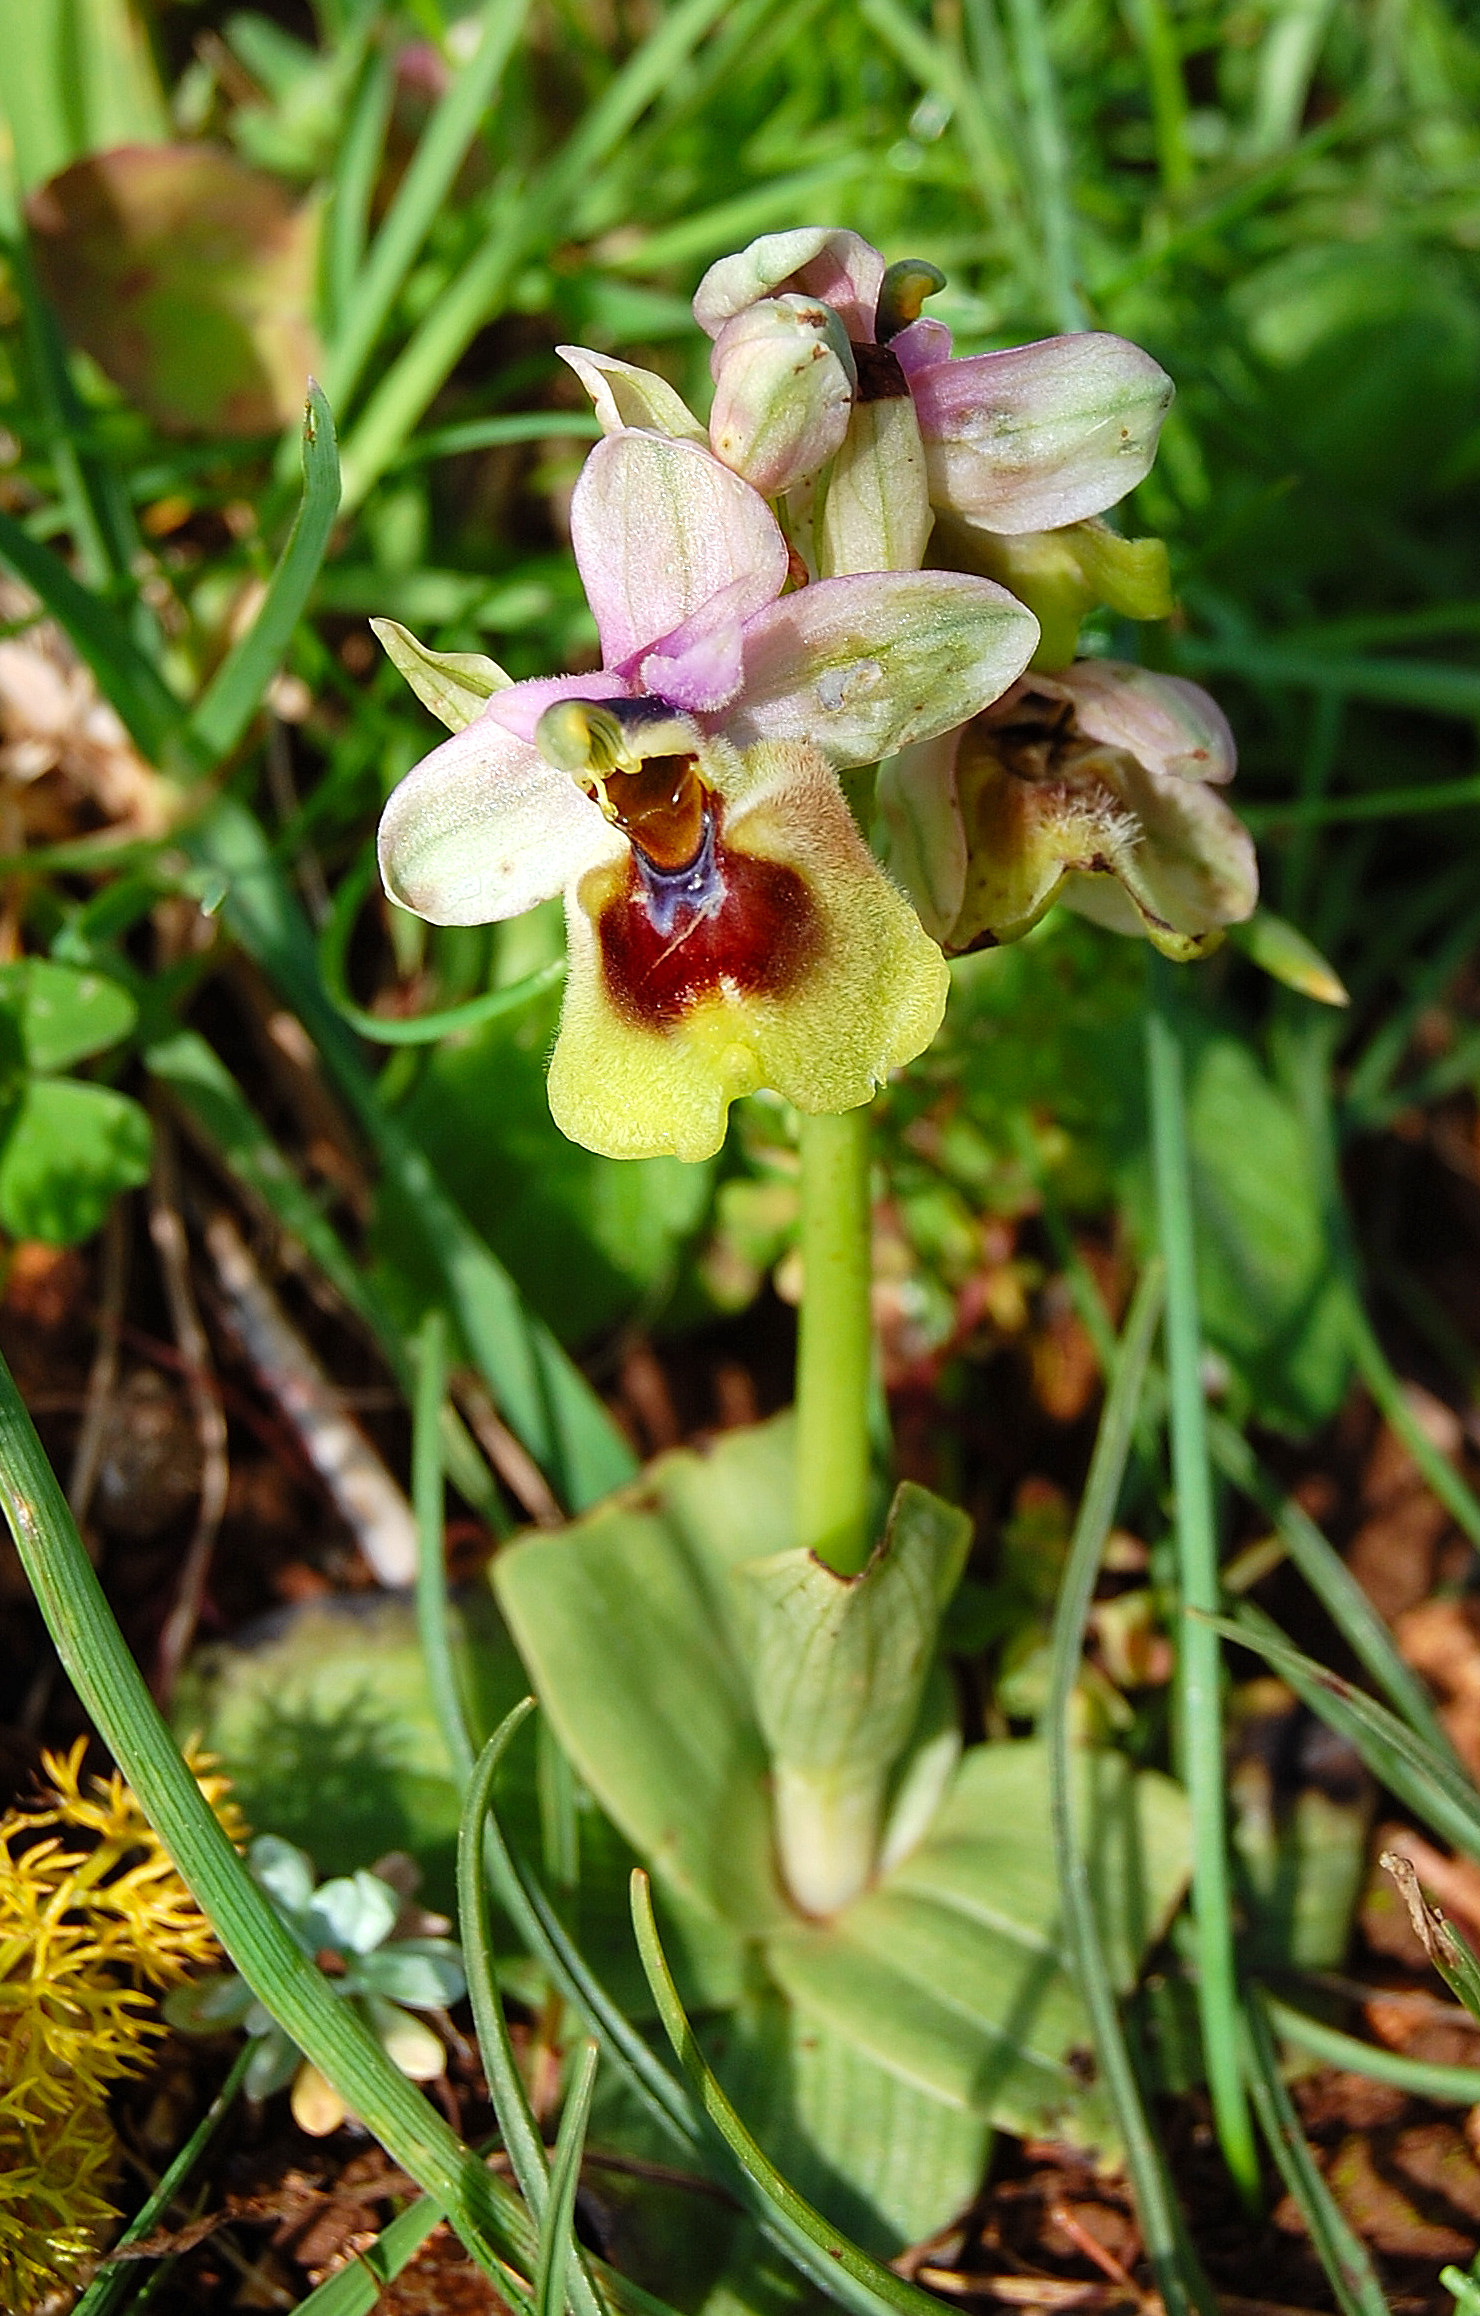 http://images3.wikia.nocookie.net/__cb20071209214116/orchids/en/images/1/19/Ophrys_tenthredinifera.jpg